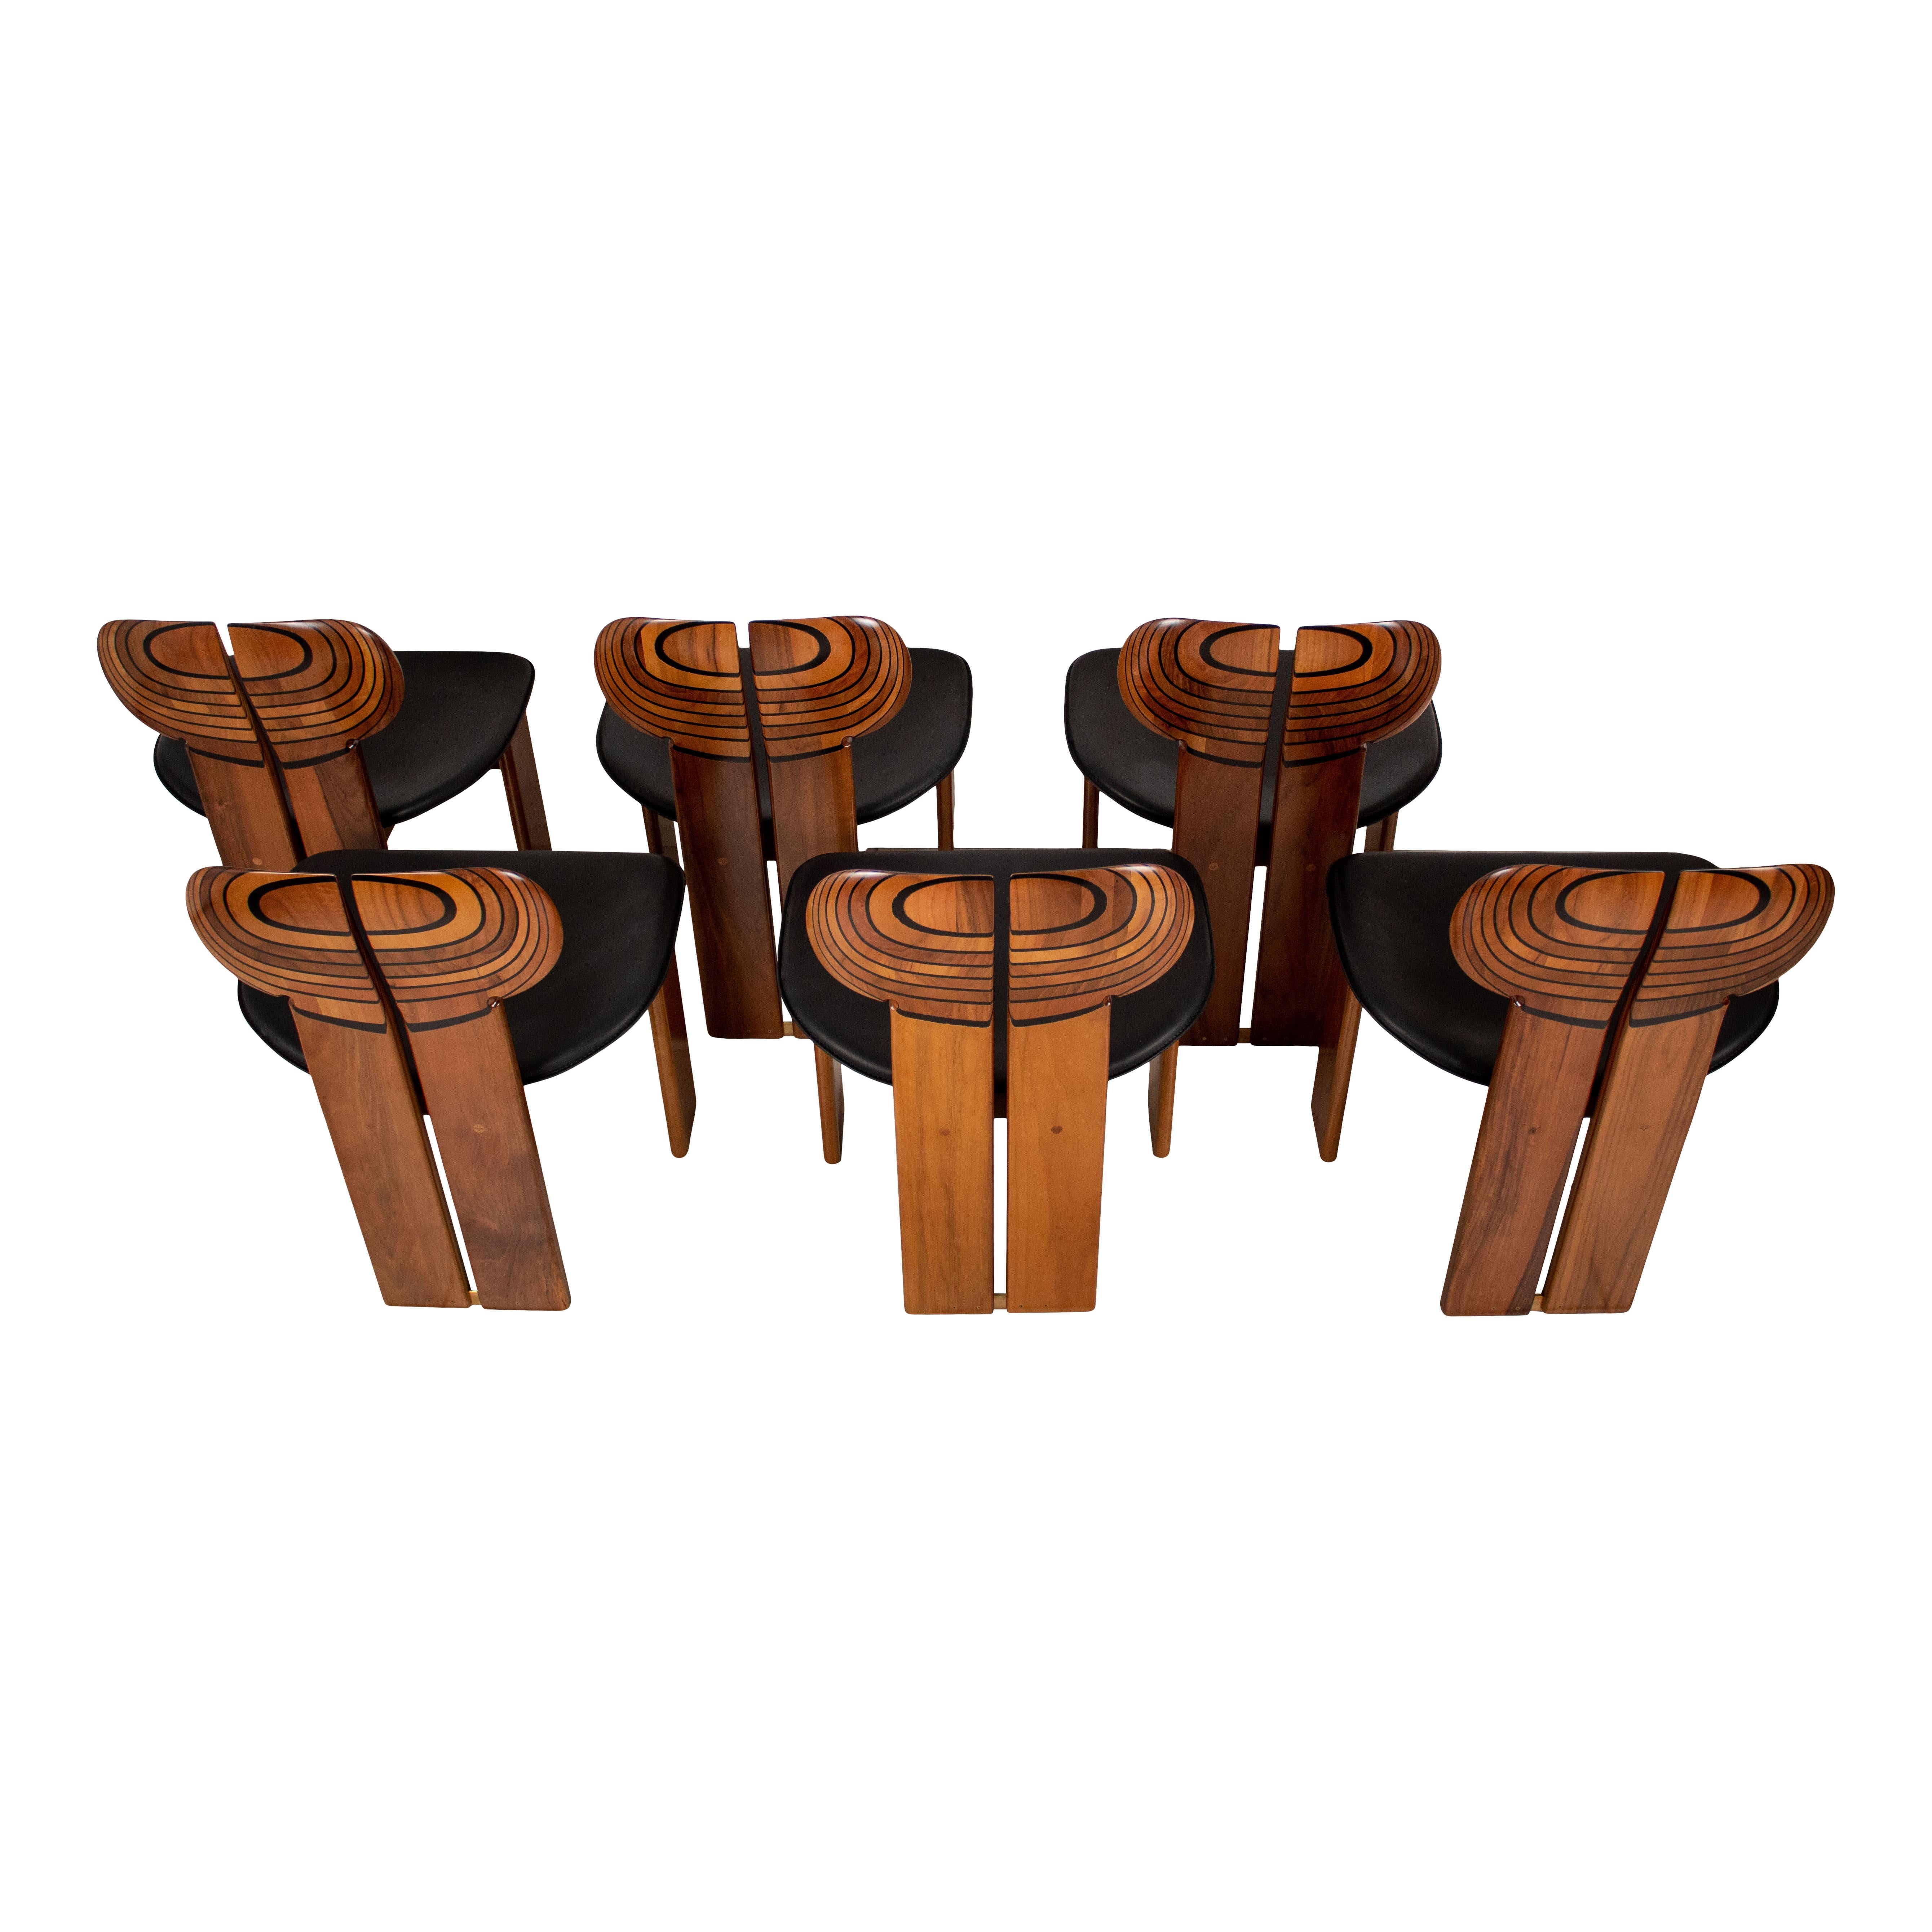 Afra and Tobia Scarpa Walnut Africa Dining Chair for Maxalto, 1976, Set of 6 For Sale 1